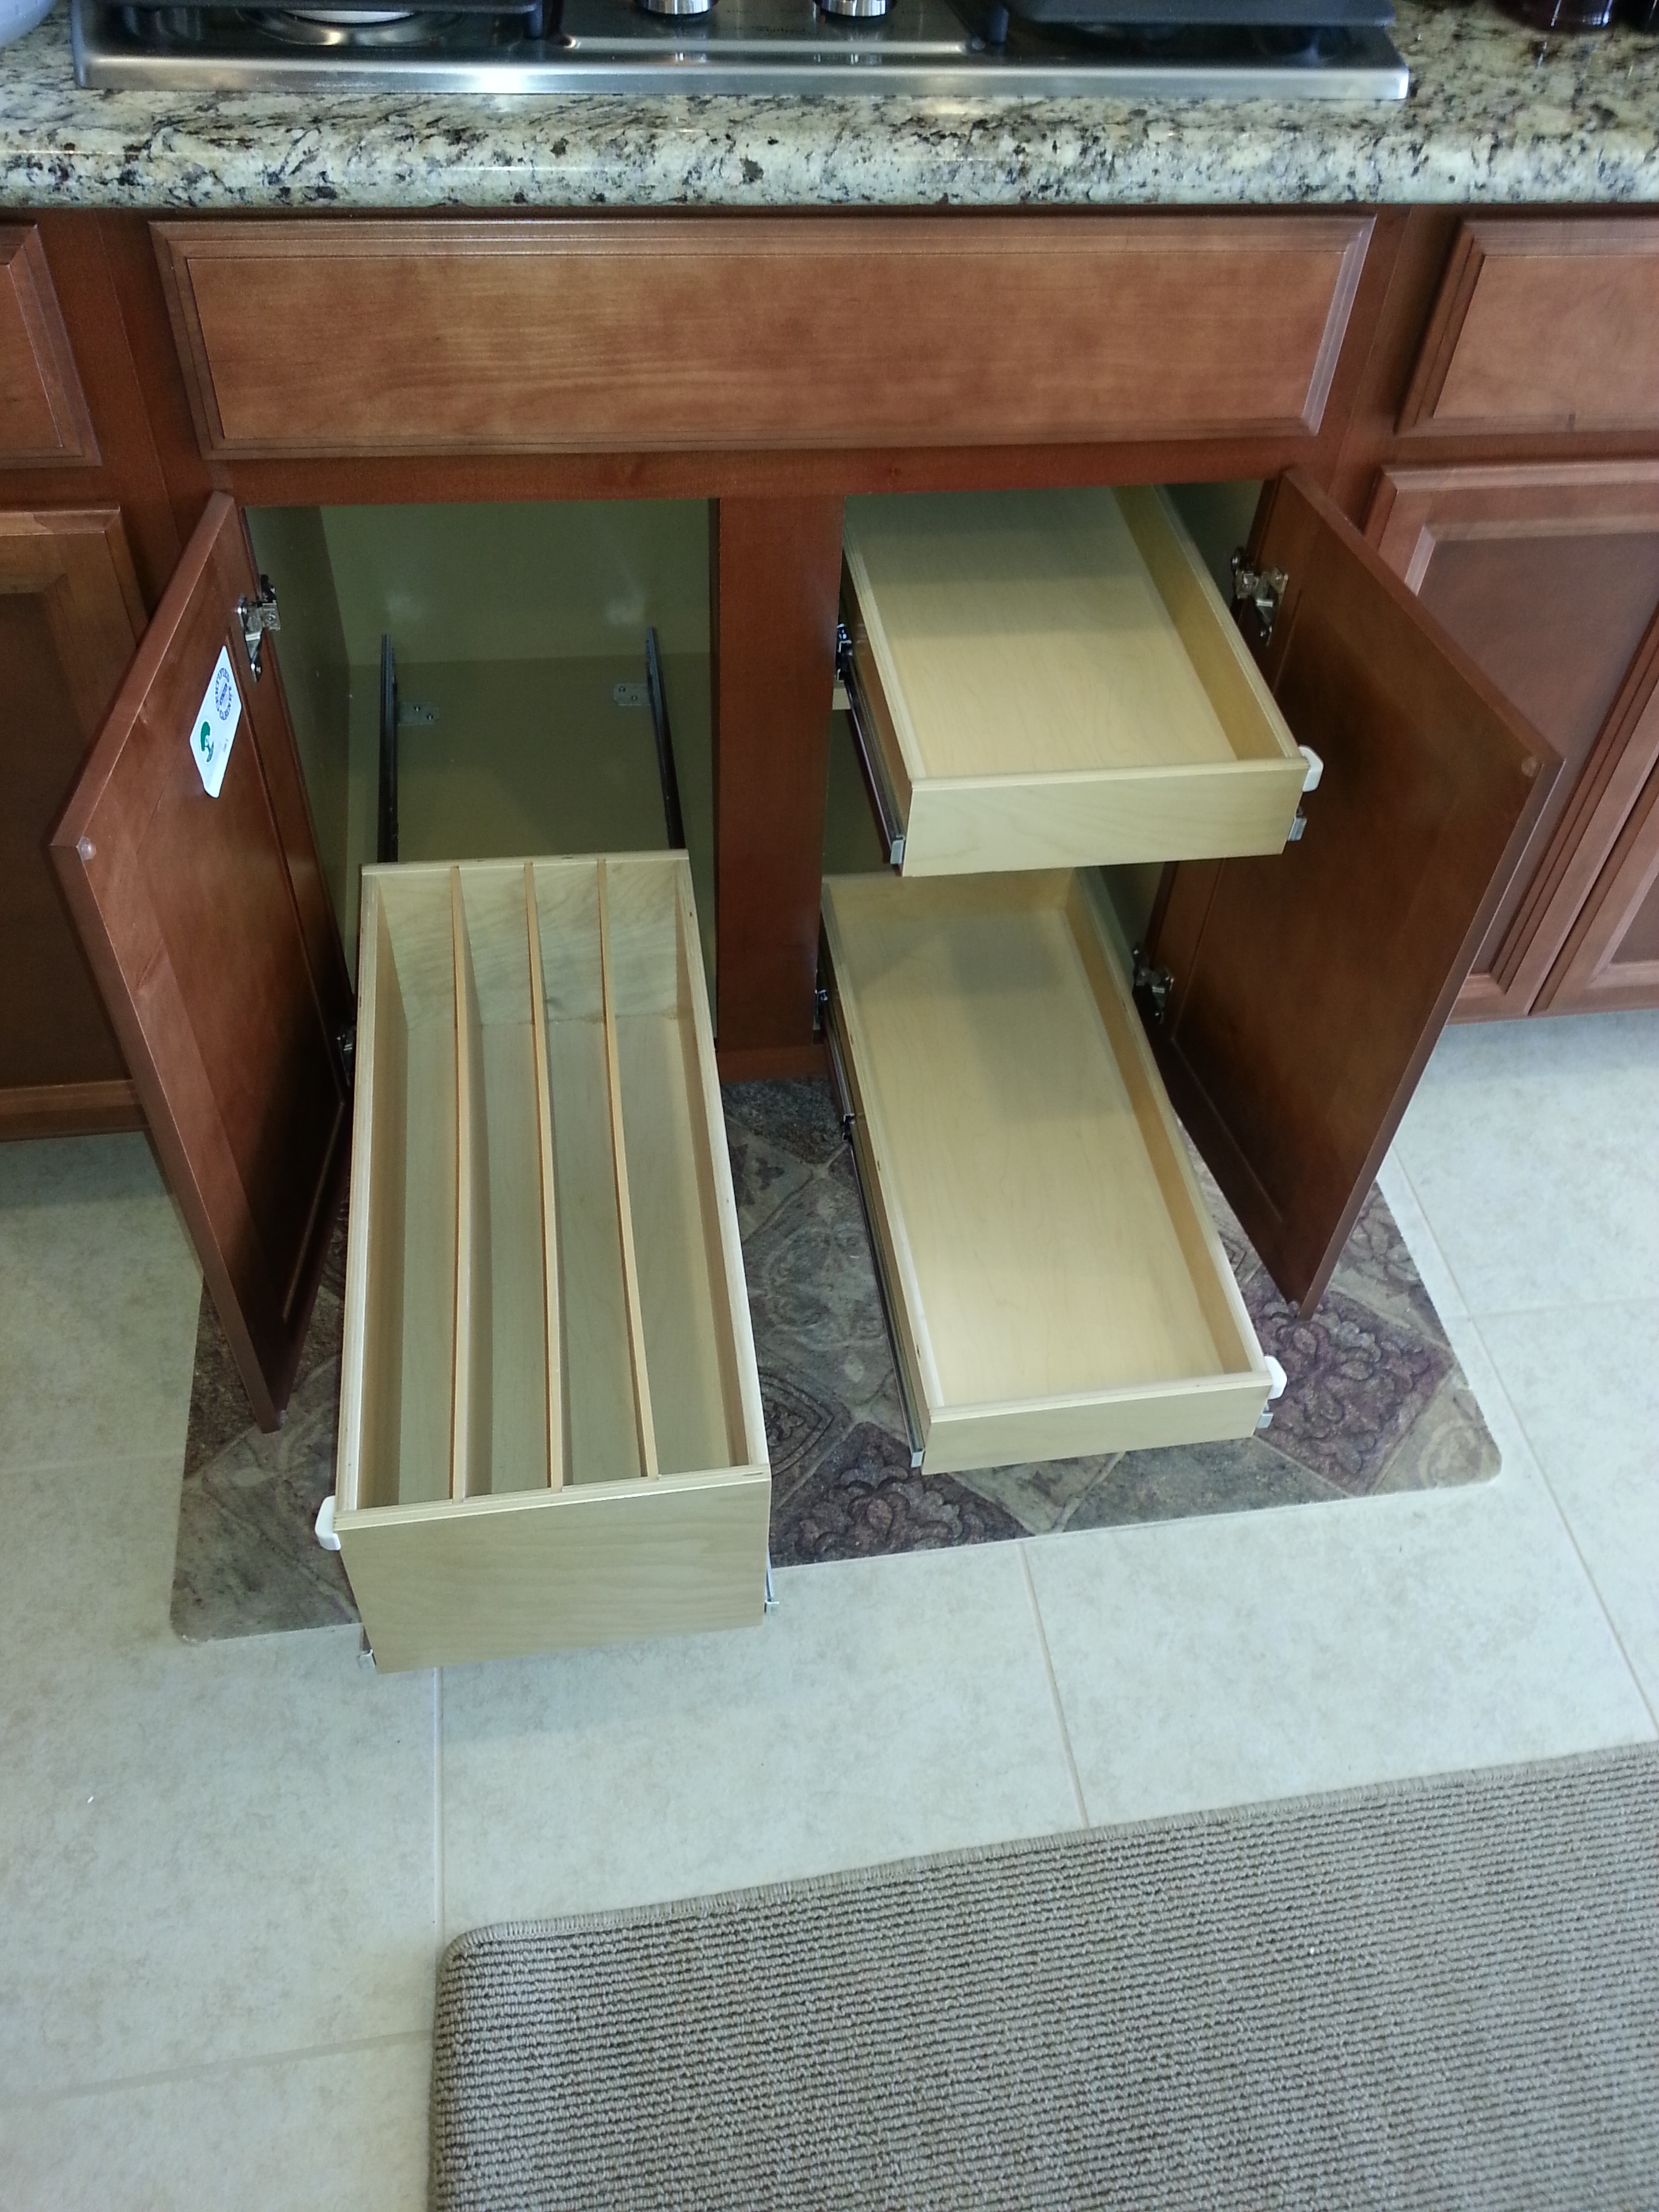 Pull Out & Slide Out Shelves in Elk Grove, CA - ALL ORGANIZED